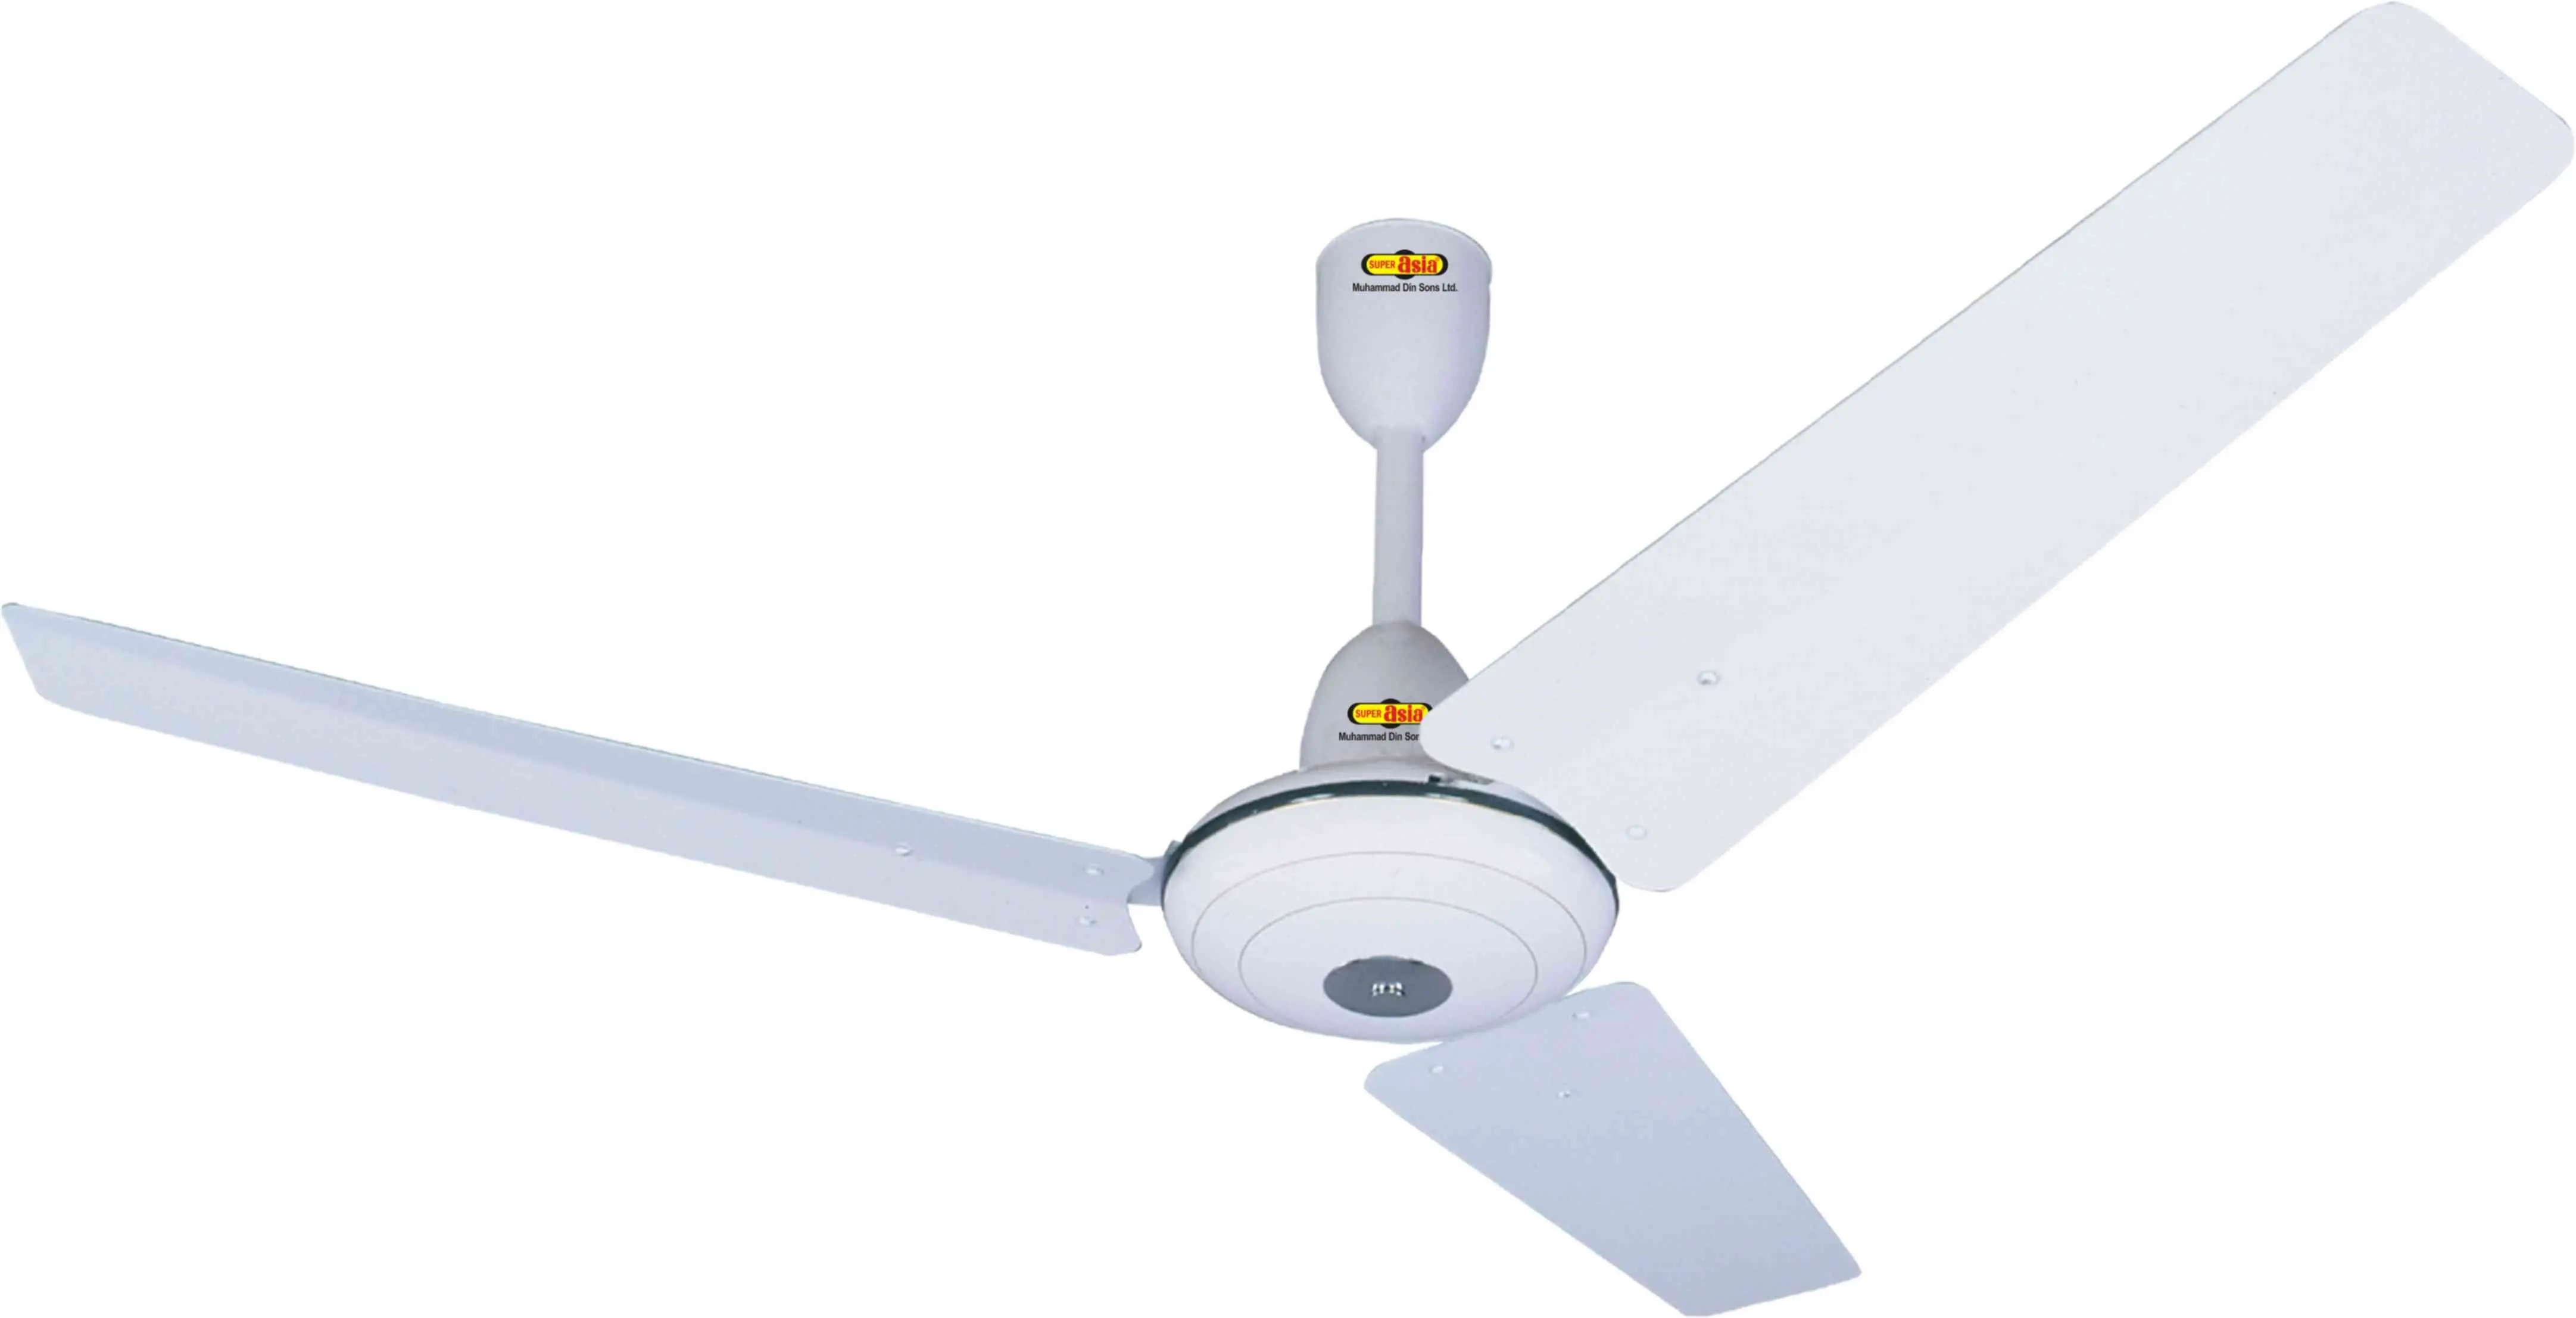 Ceiling Fans Saver Model Buy Ceiling Fans Product On Alibaba Com